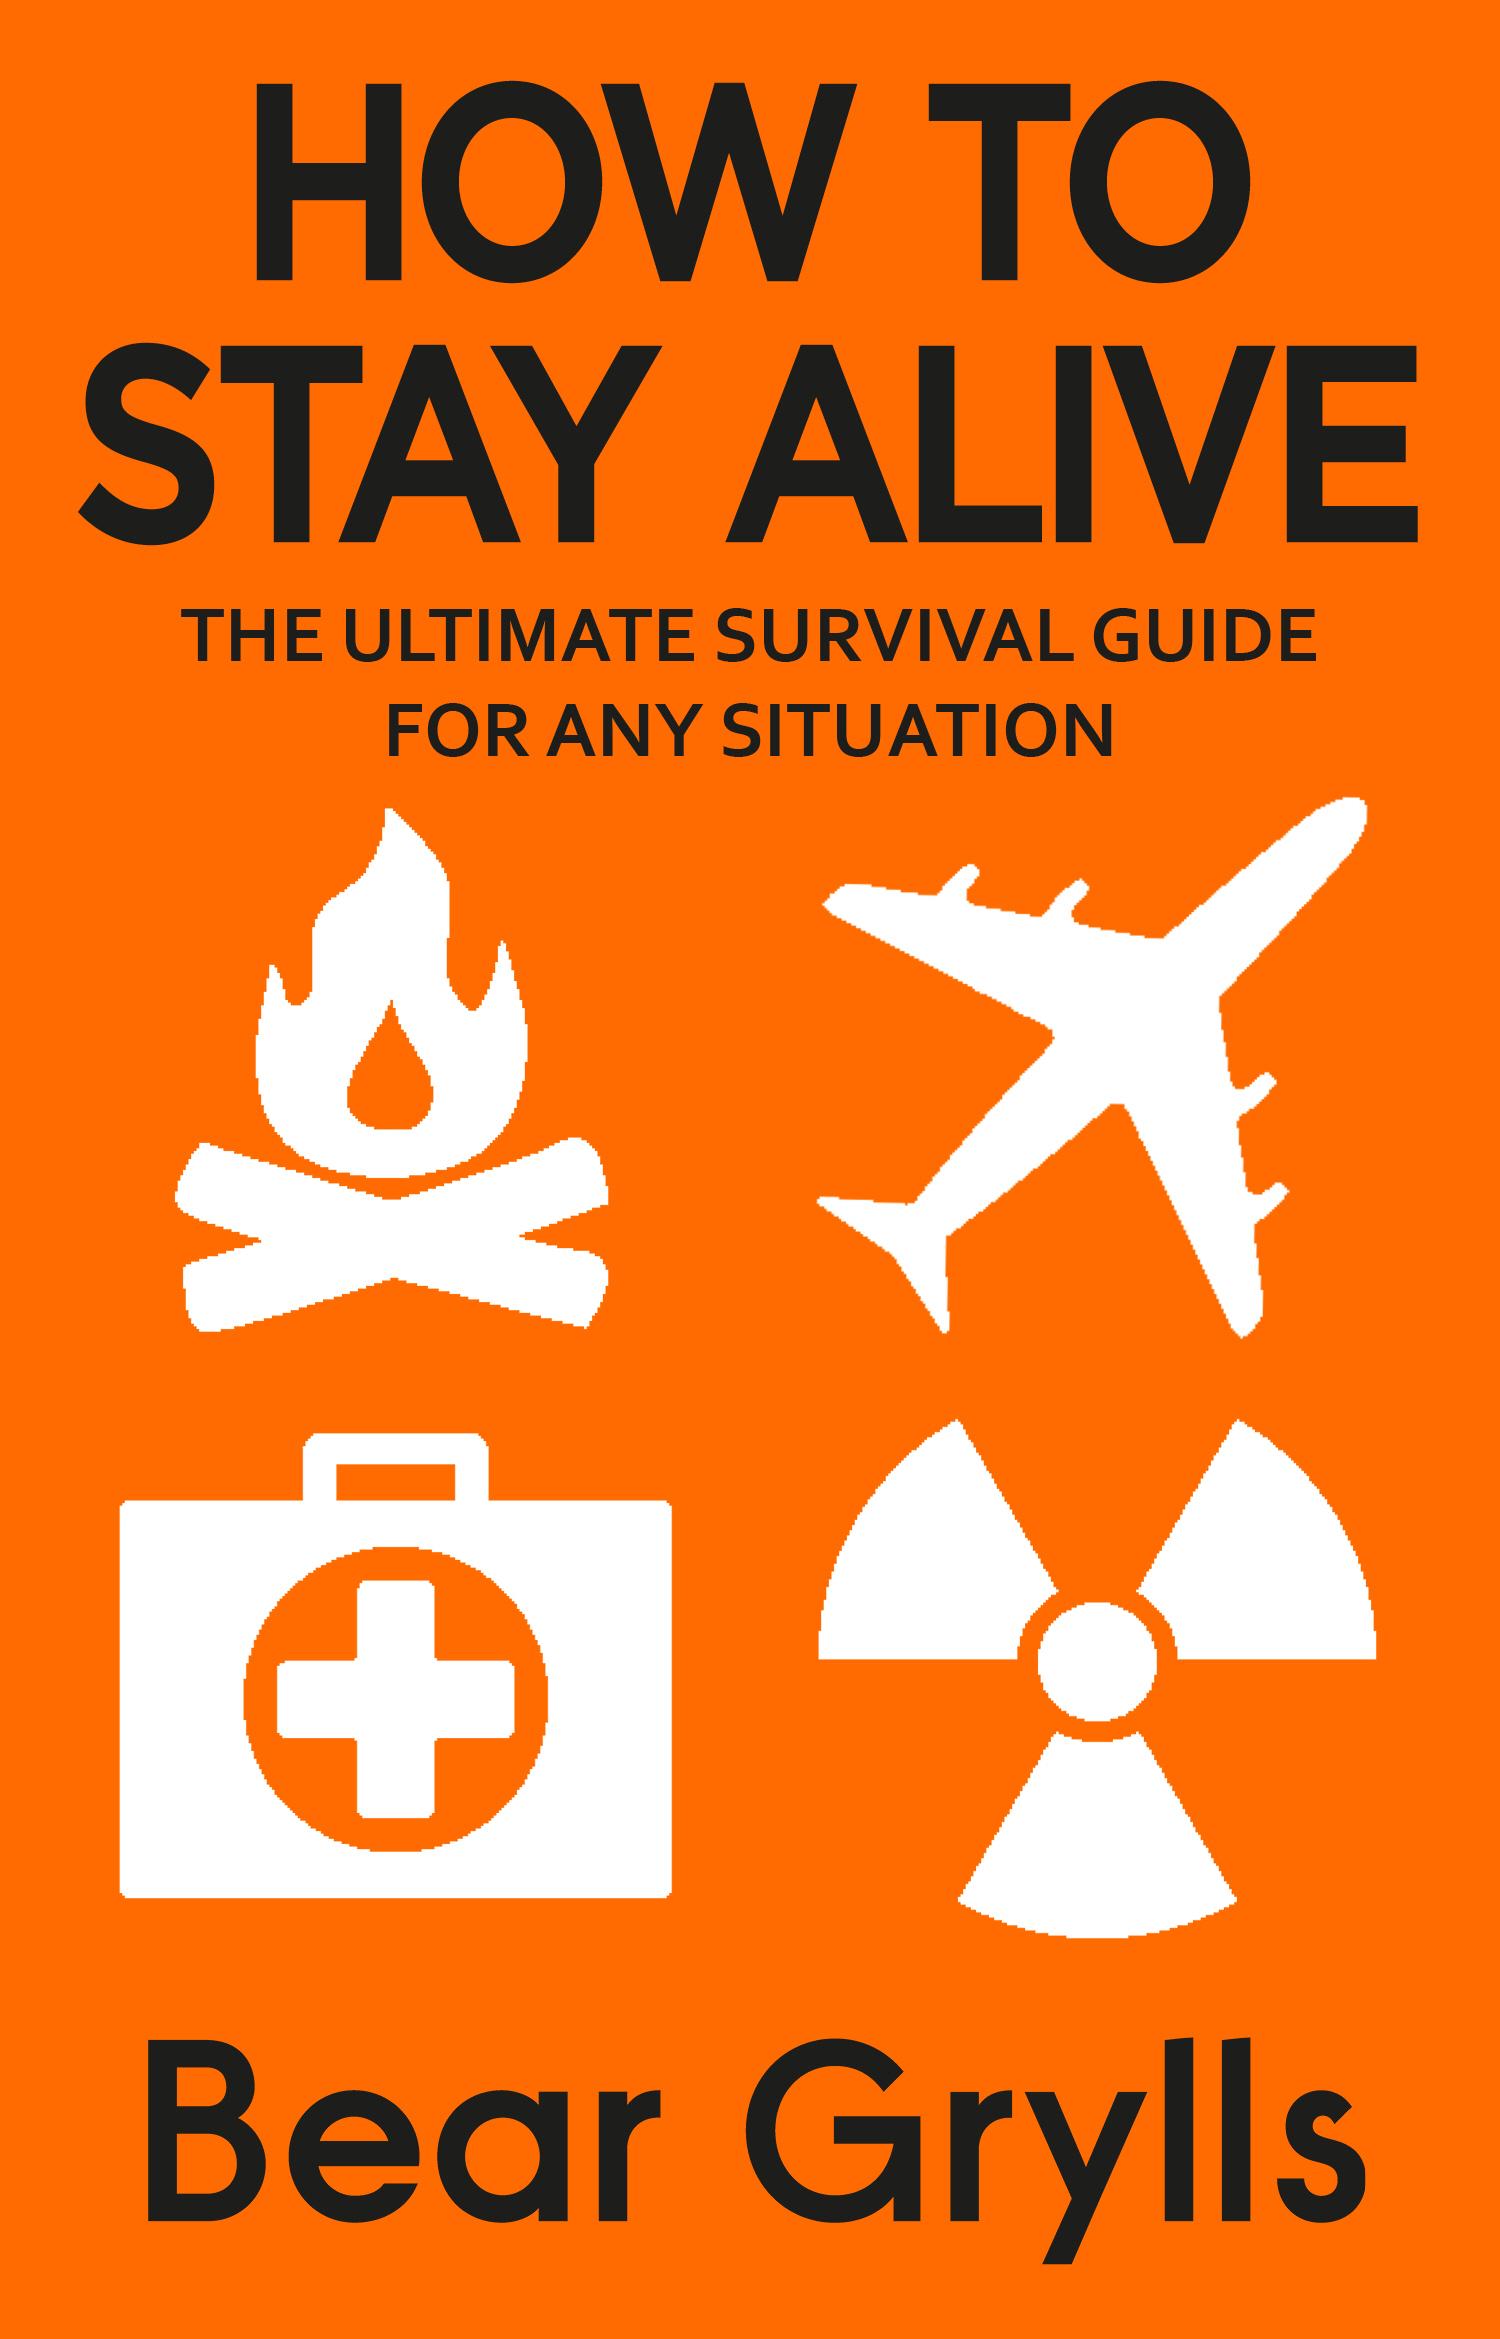 How to Stay Alive - Bear Grylls